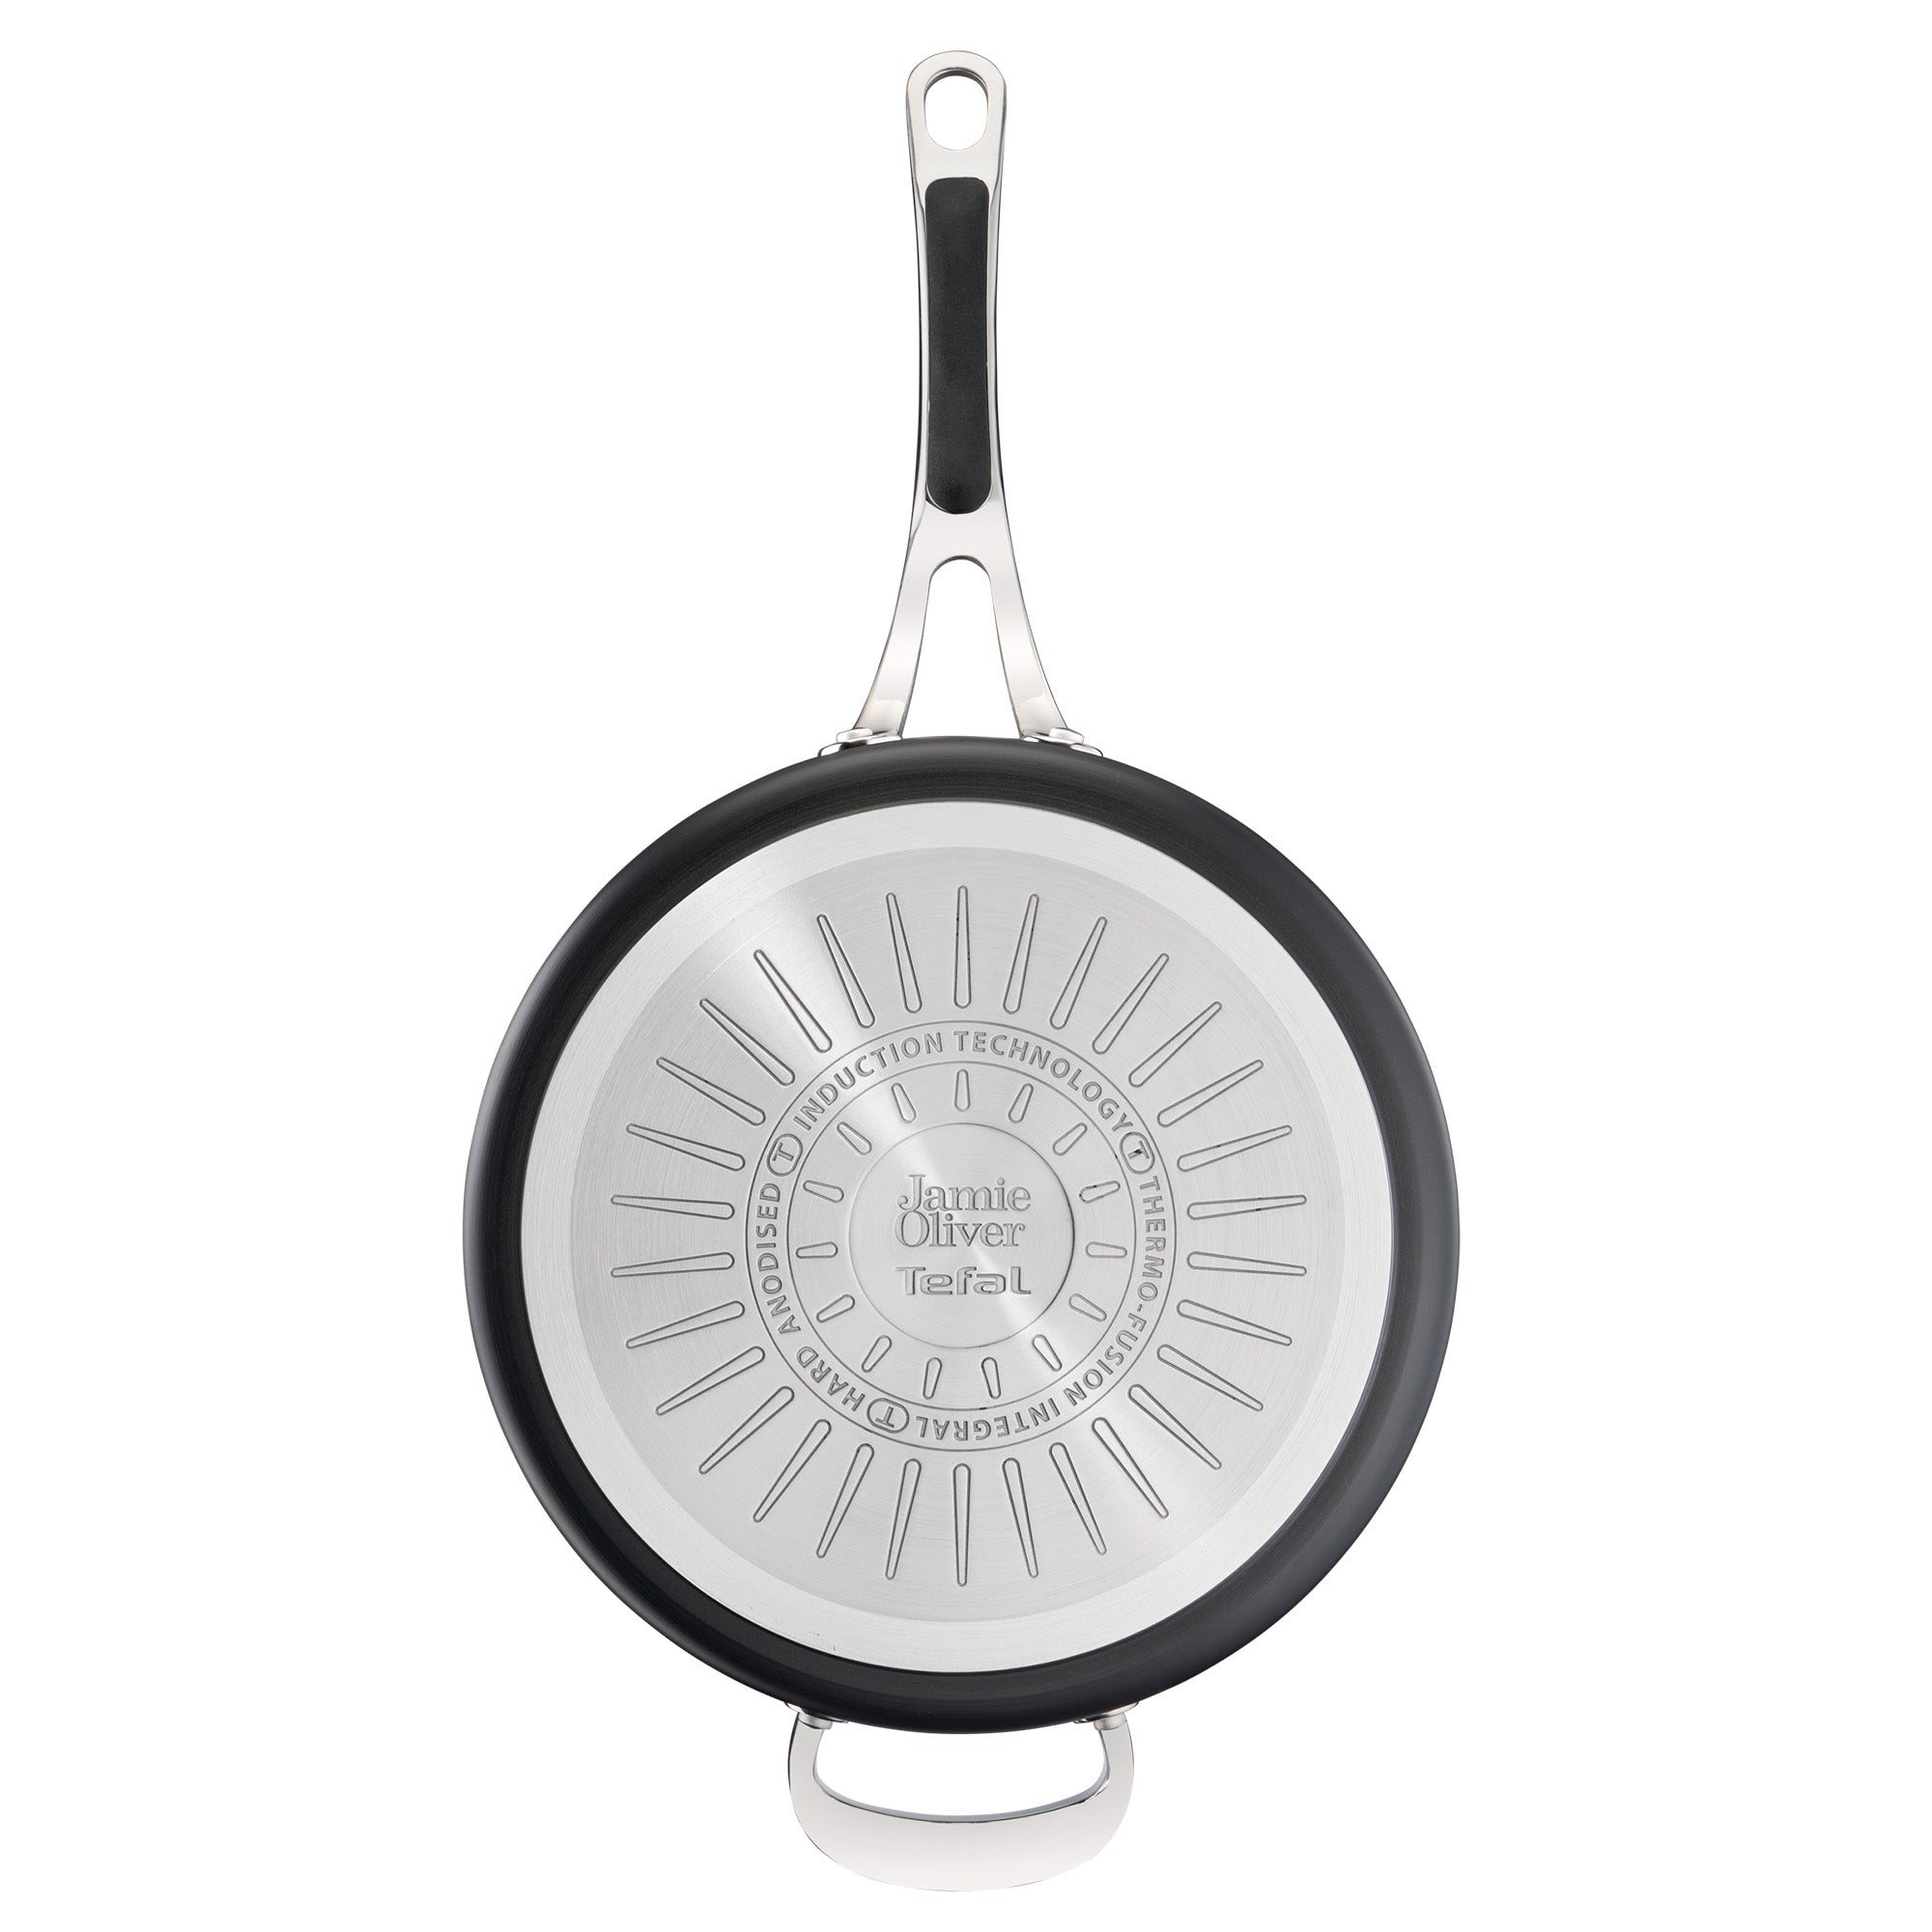 Jamie Oliver by Tefal Cooks Classic Non-Stick Induction Hard Anodised Sautepan + Lid 26cm